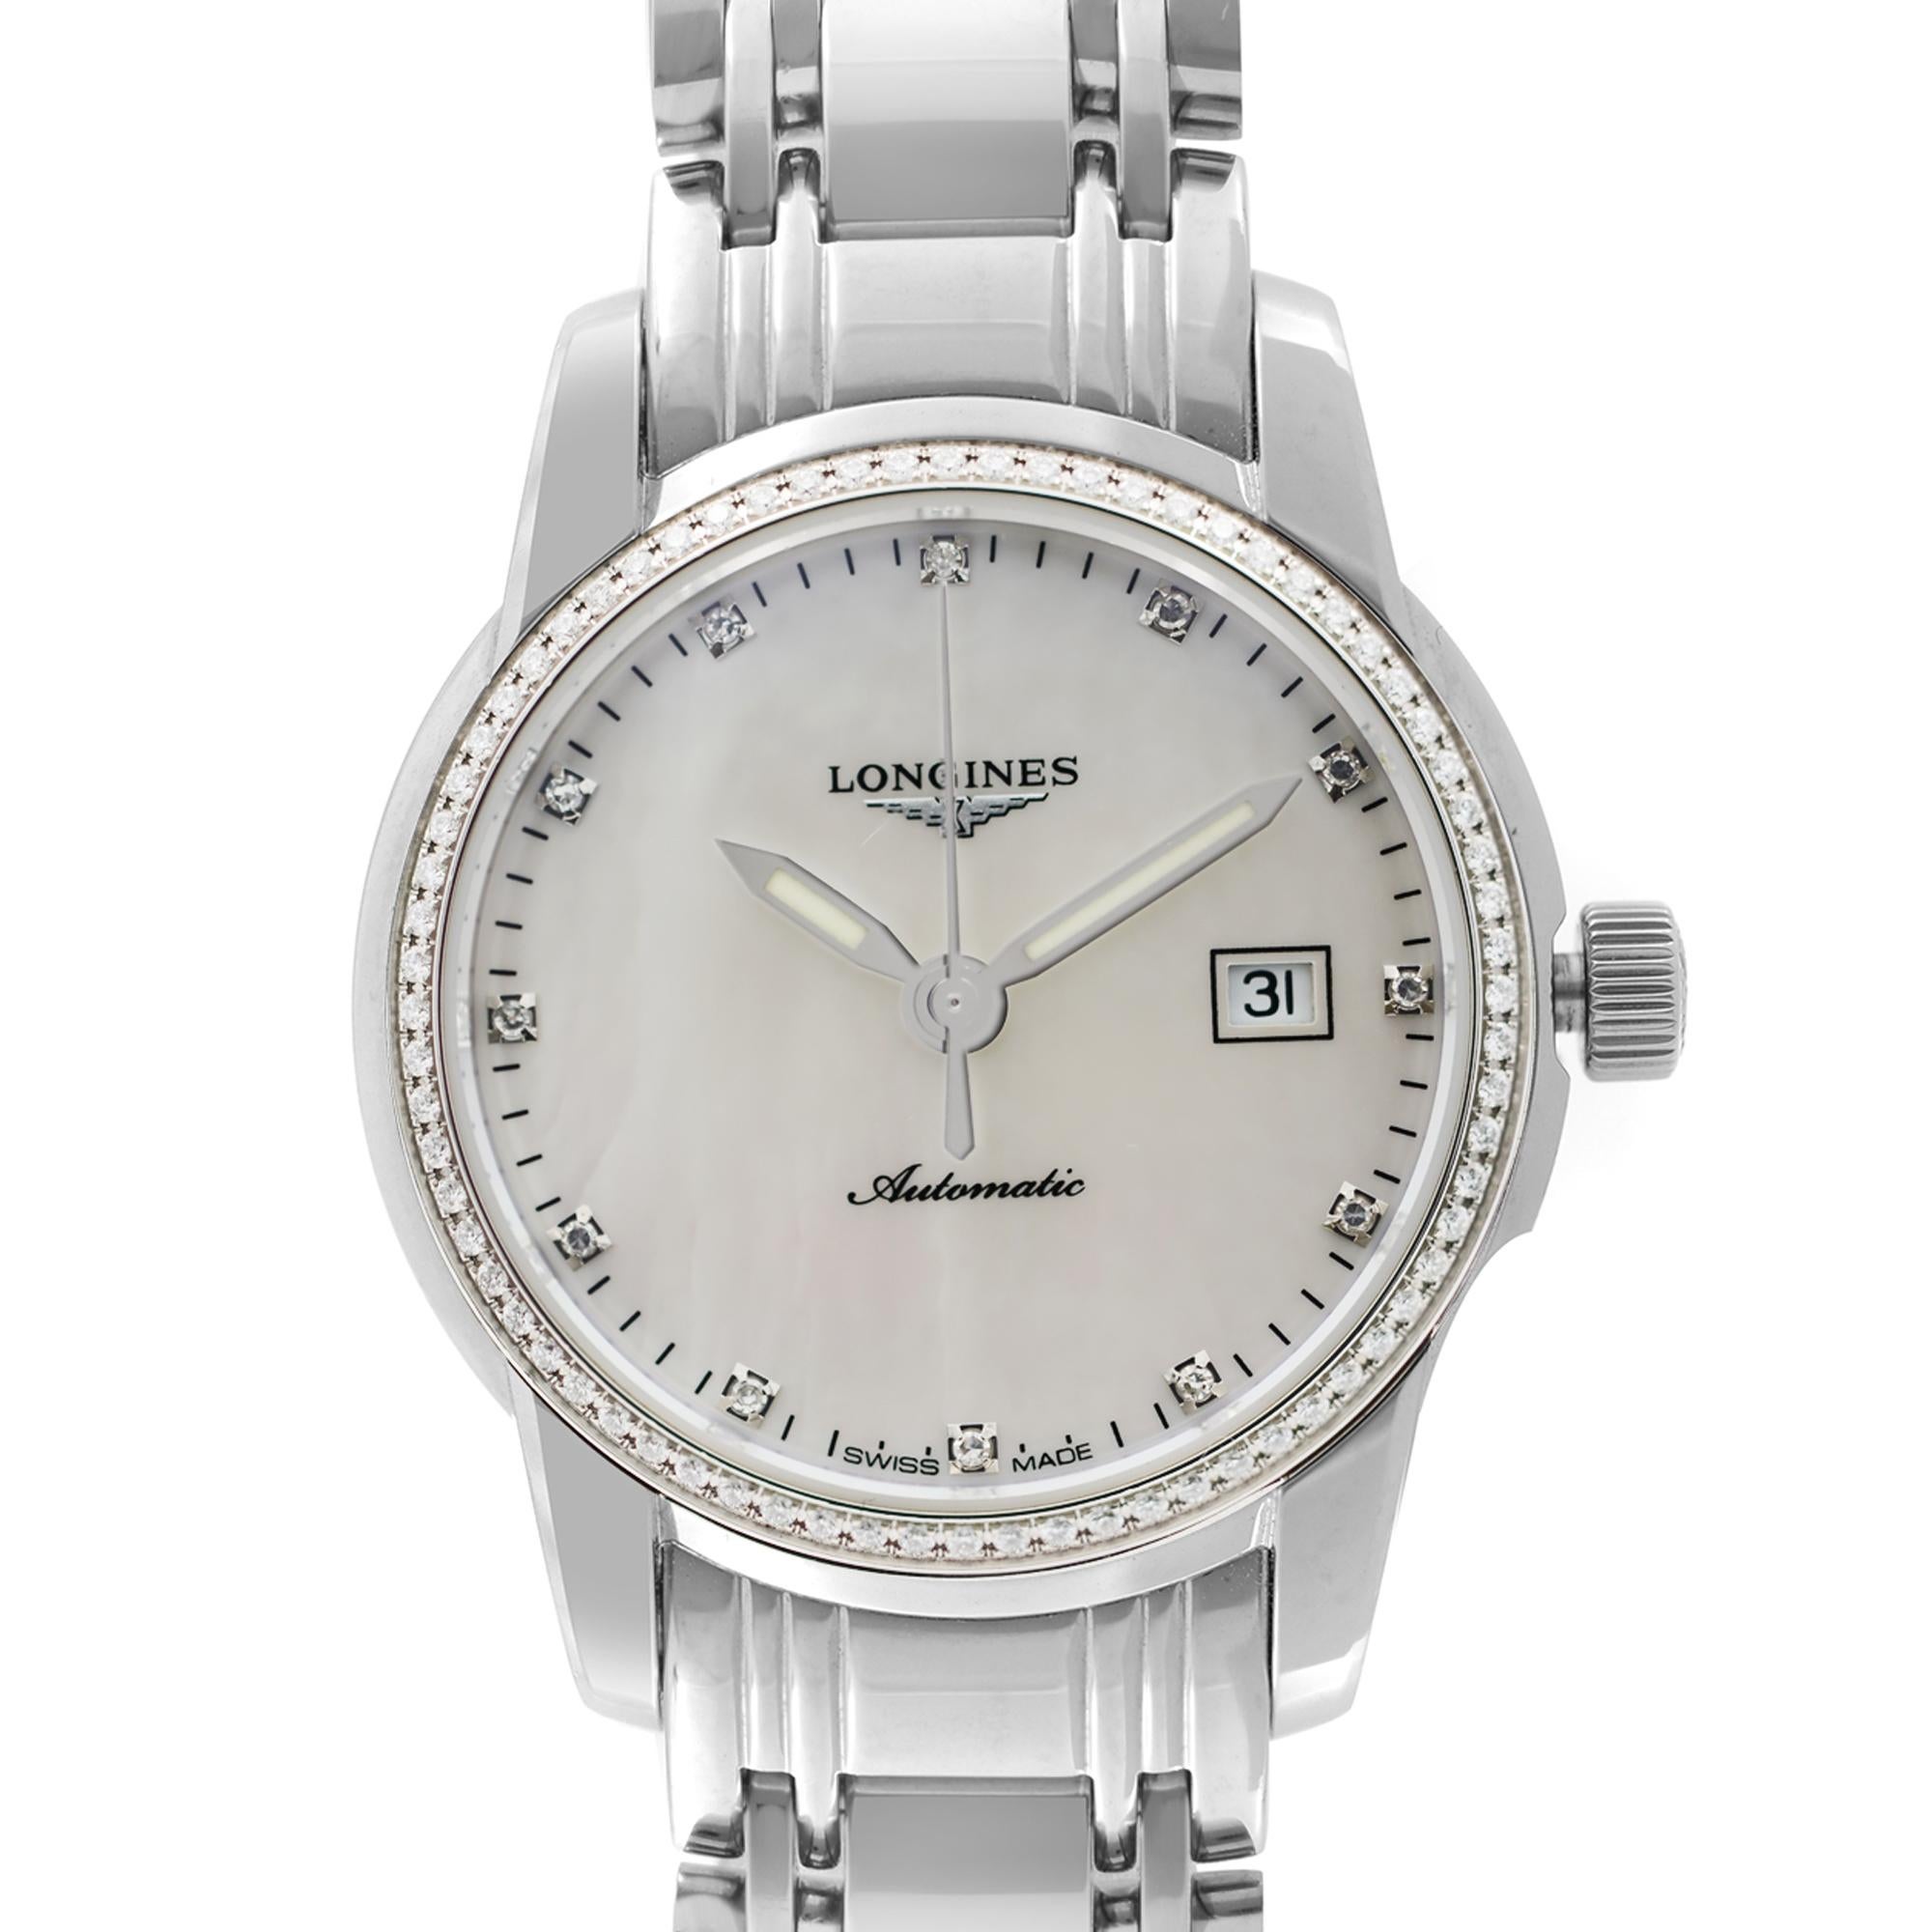 Display Model Longines Saint Imier Stainless Steel White Diamond Dial Automatic Ladies Watch L2.563.0.87.6 This Beautiful Timepiece Features: Stainless Steel Case & Bracelet, Fixed Diamond Imbedded Bezel, White Dial with Luminous Silver-Tone Hands &